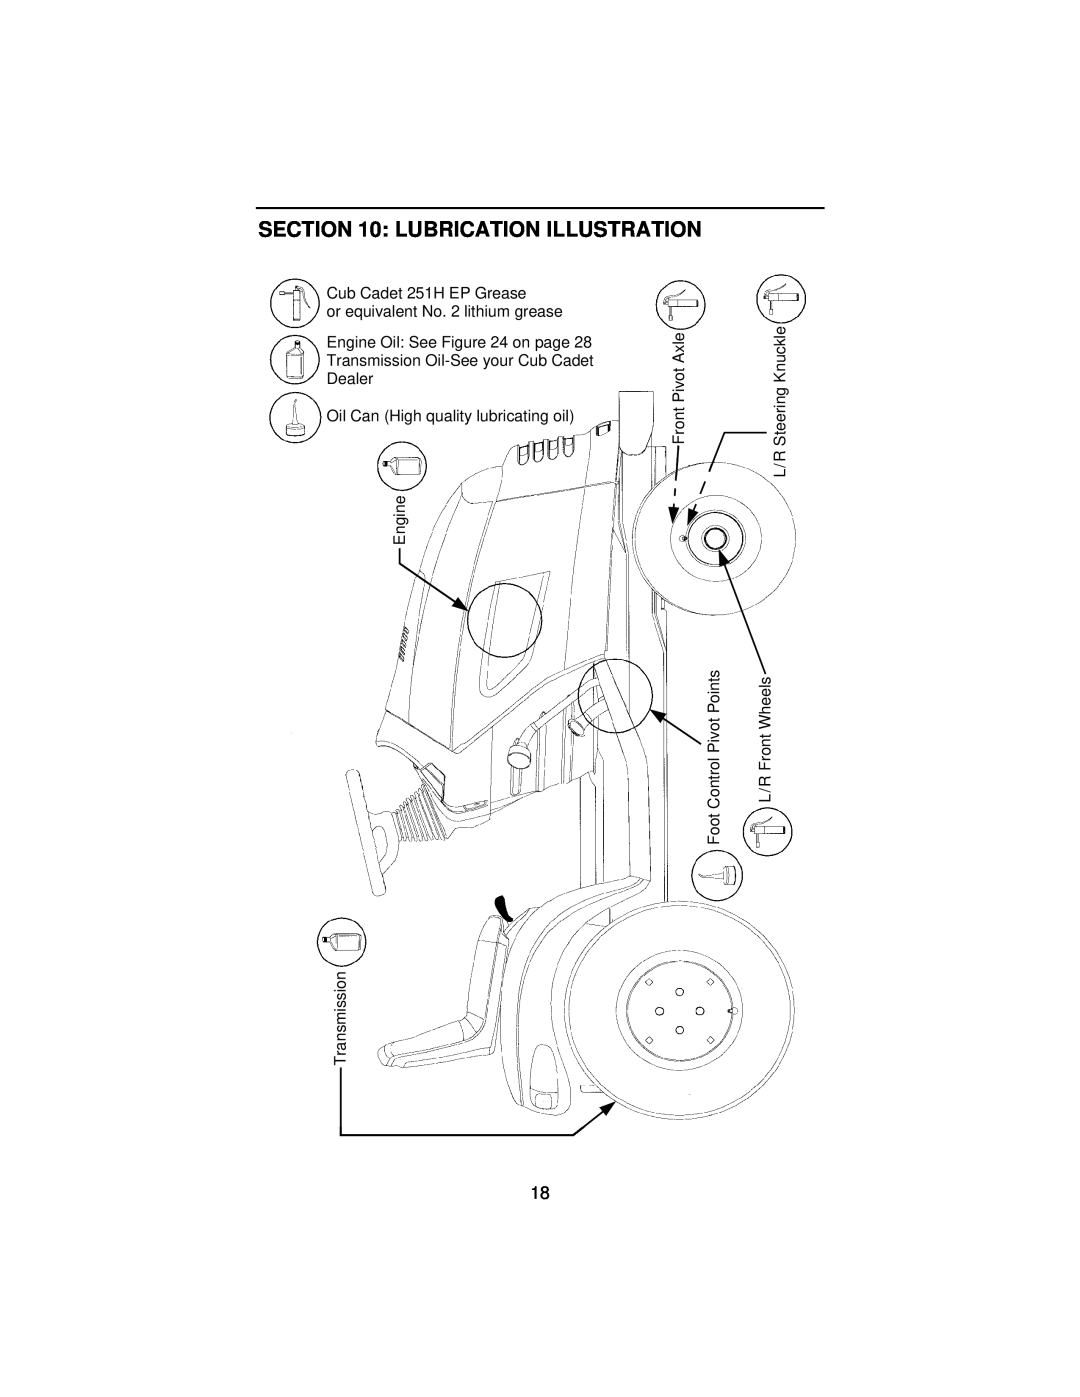 Cub Cadet 3185 Lubrication Illustration, Cub Cadet 251H EP Grease or equivalent No. 2 lithium grease, Front Pivot Axle 